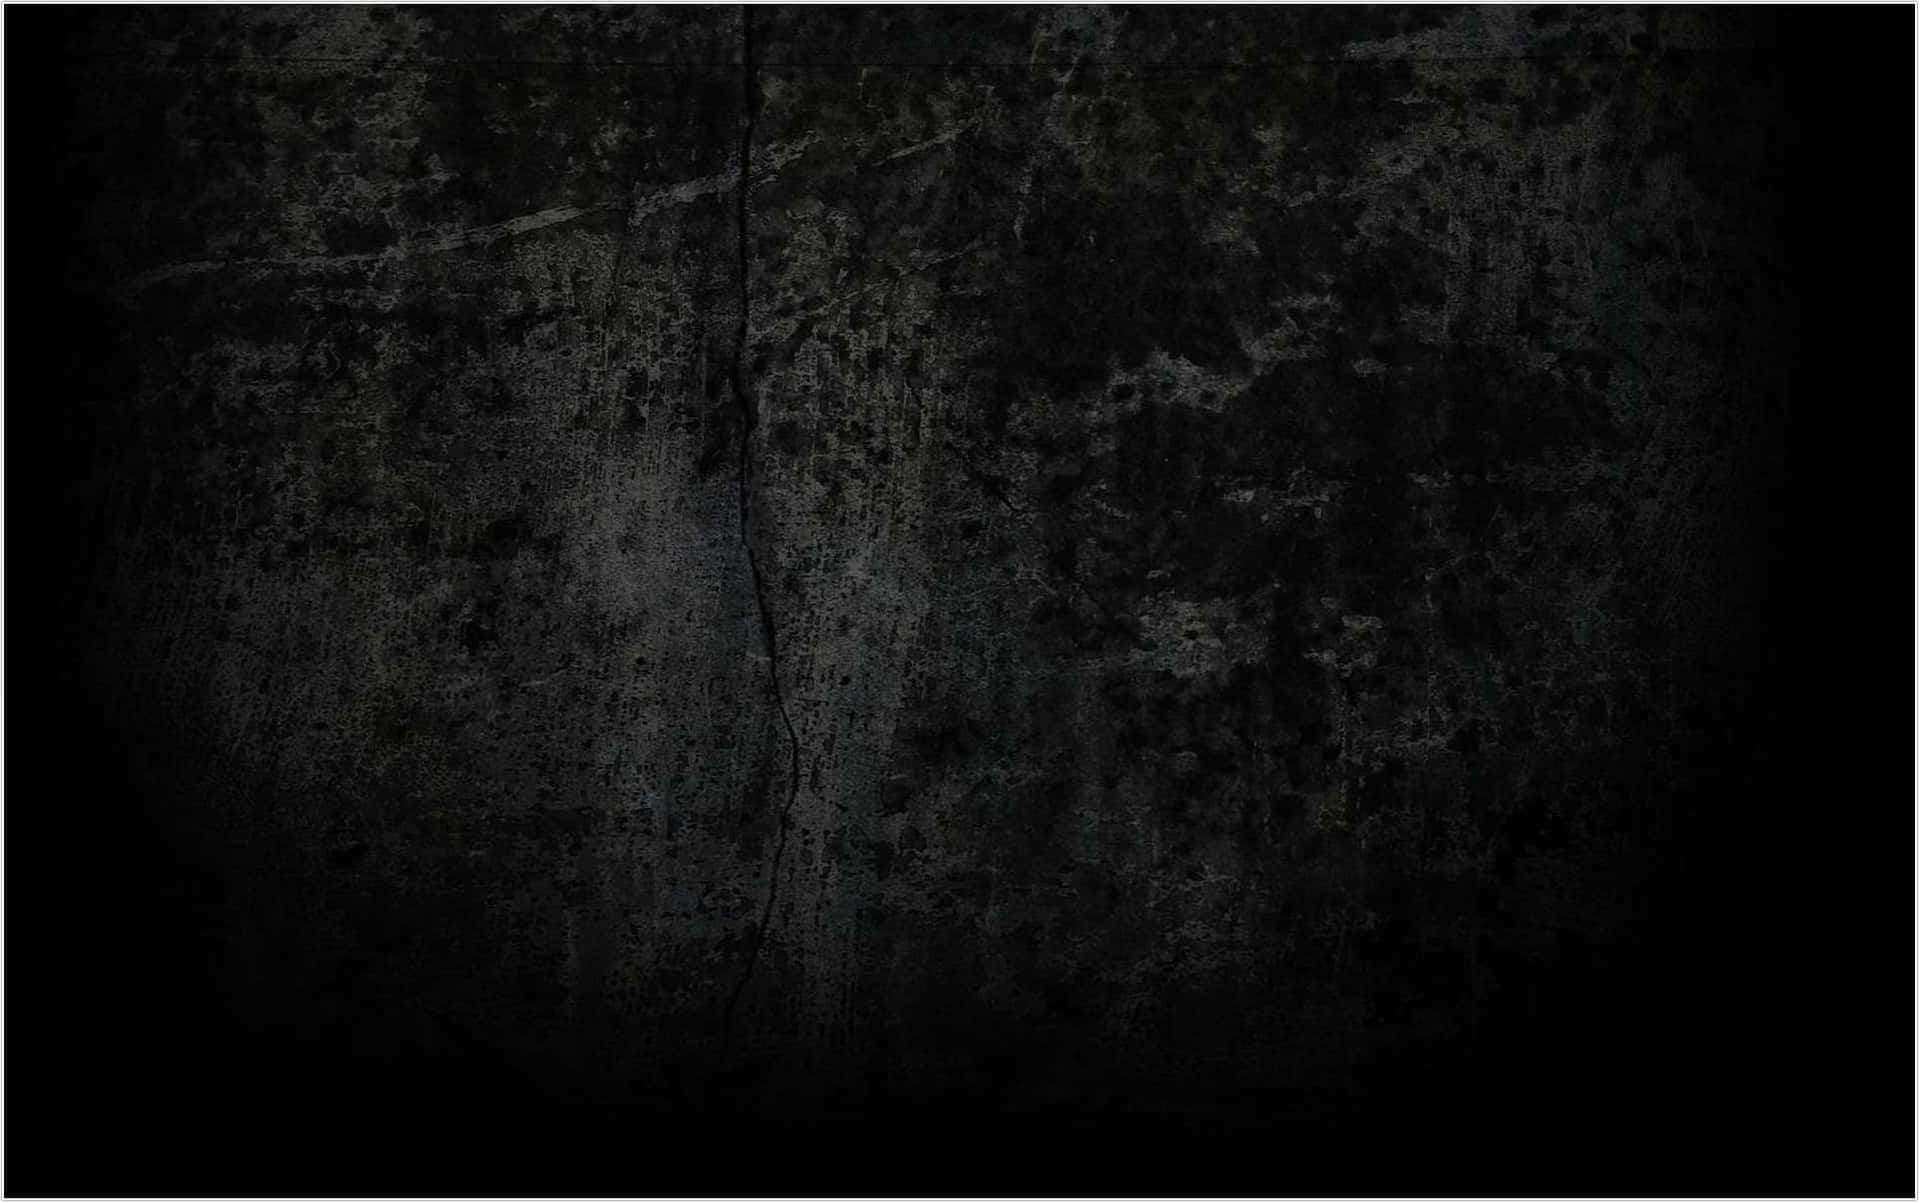 A dark and moody grunge-style background.